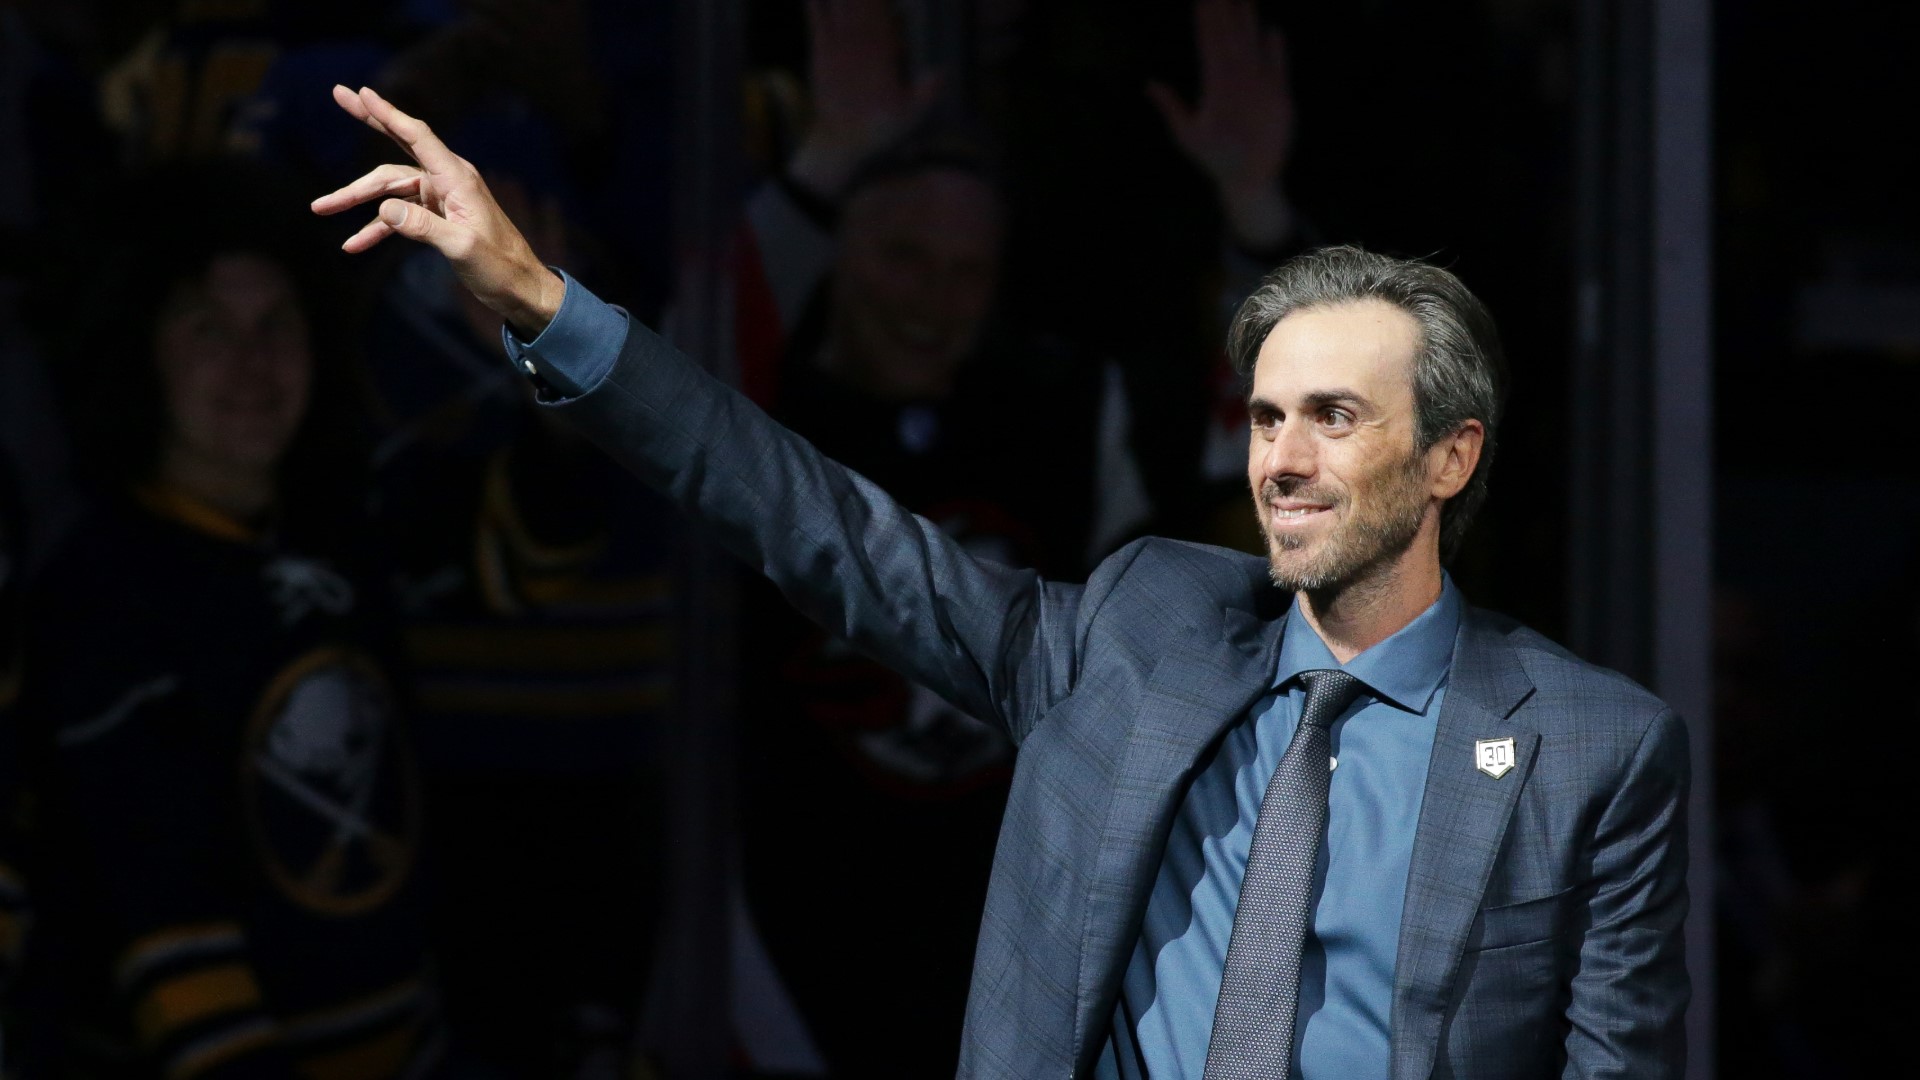 Ryan Miller spoke with the media following his Buffalo Sabres Hall of Fame ceremony on Thursday, Jan. 19, 2023, at KeyBank Center.